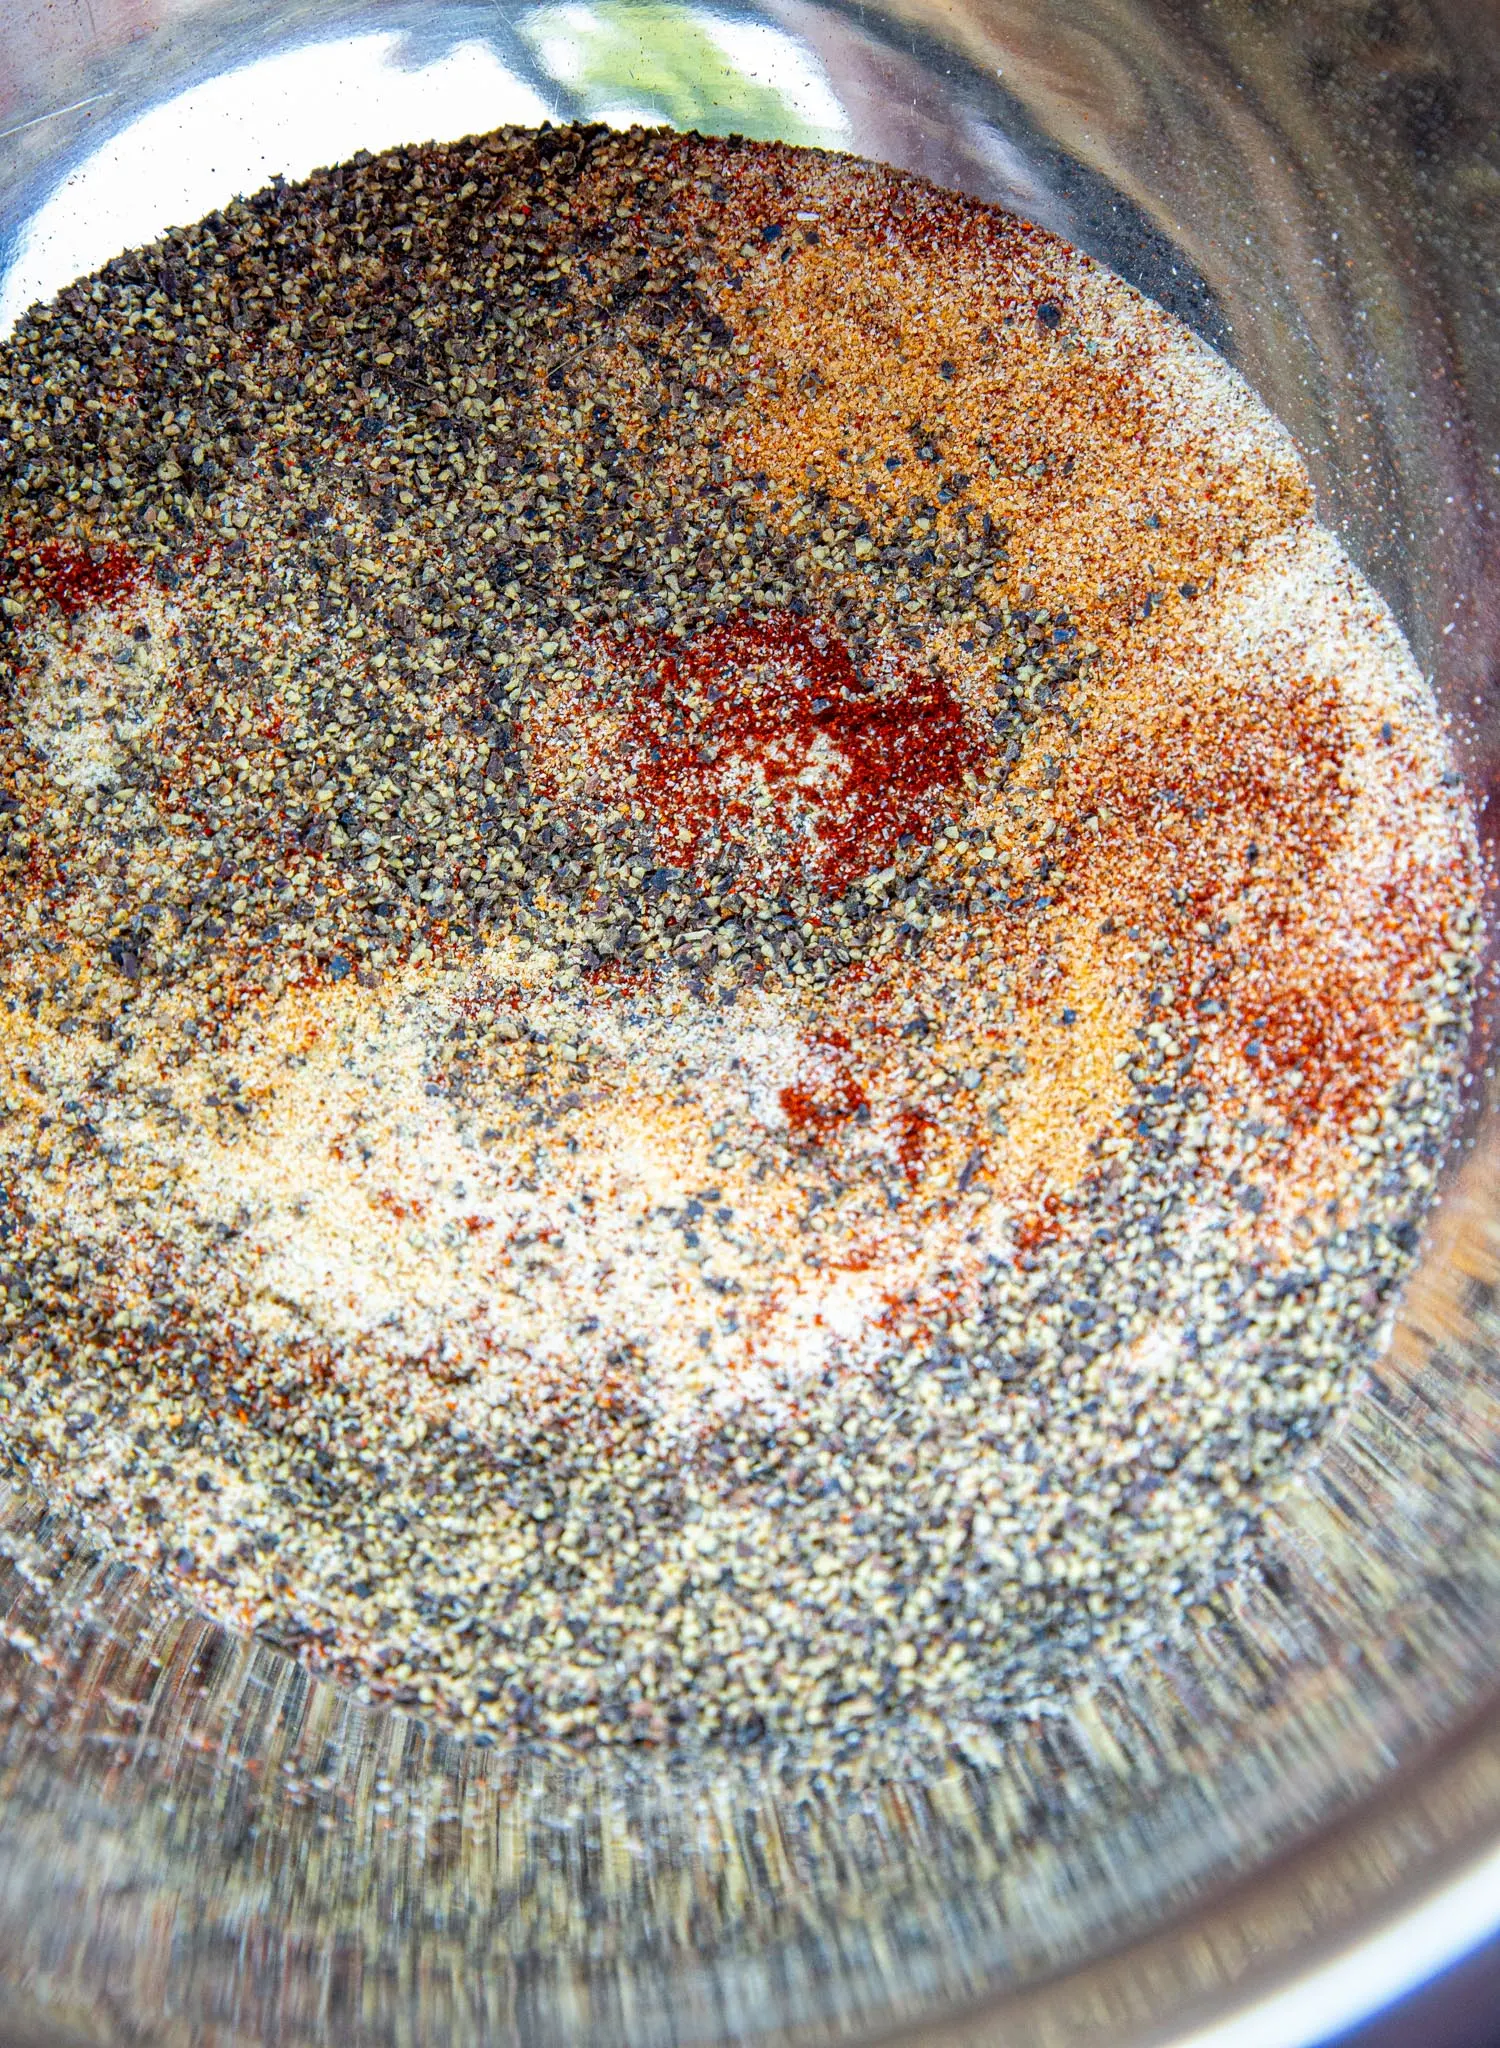 brisket rub ingredients in a bowl before mixing